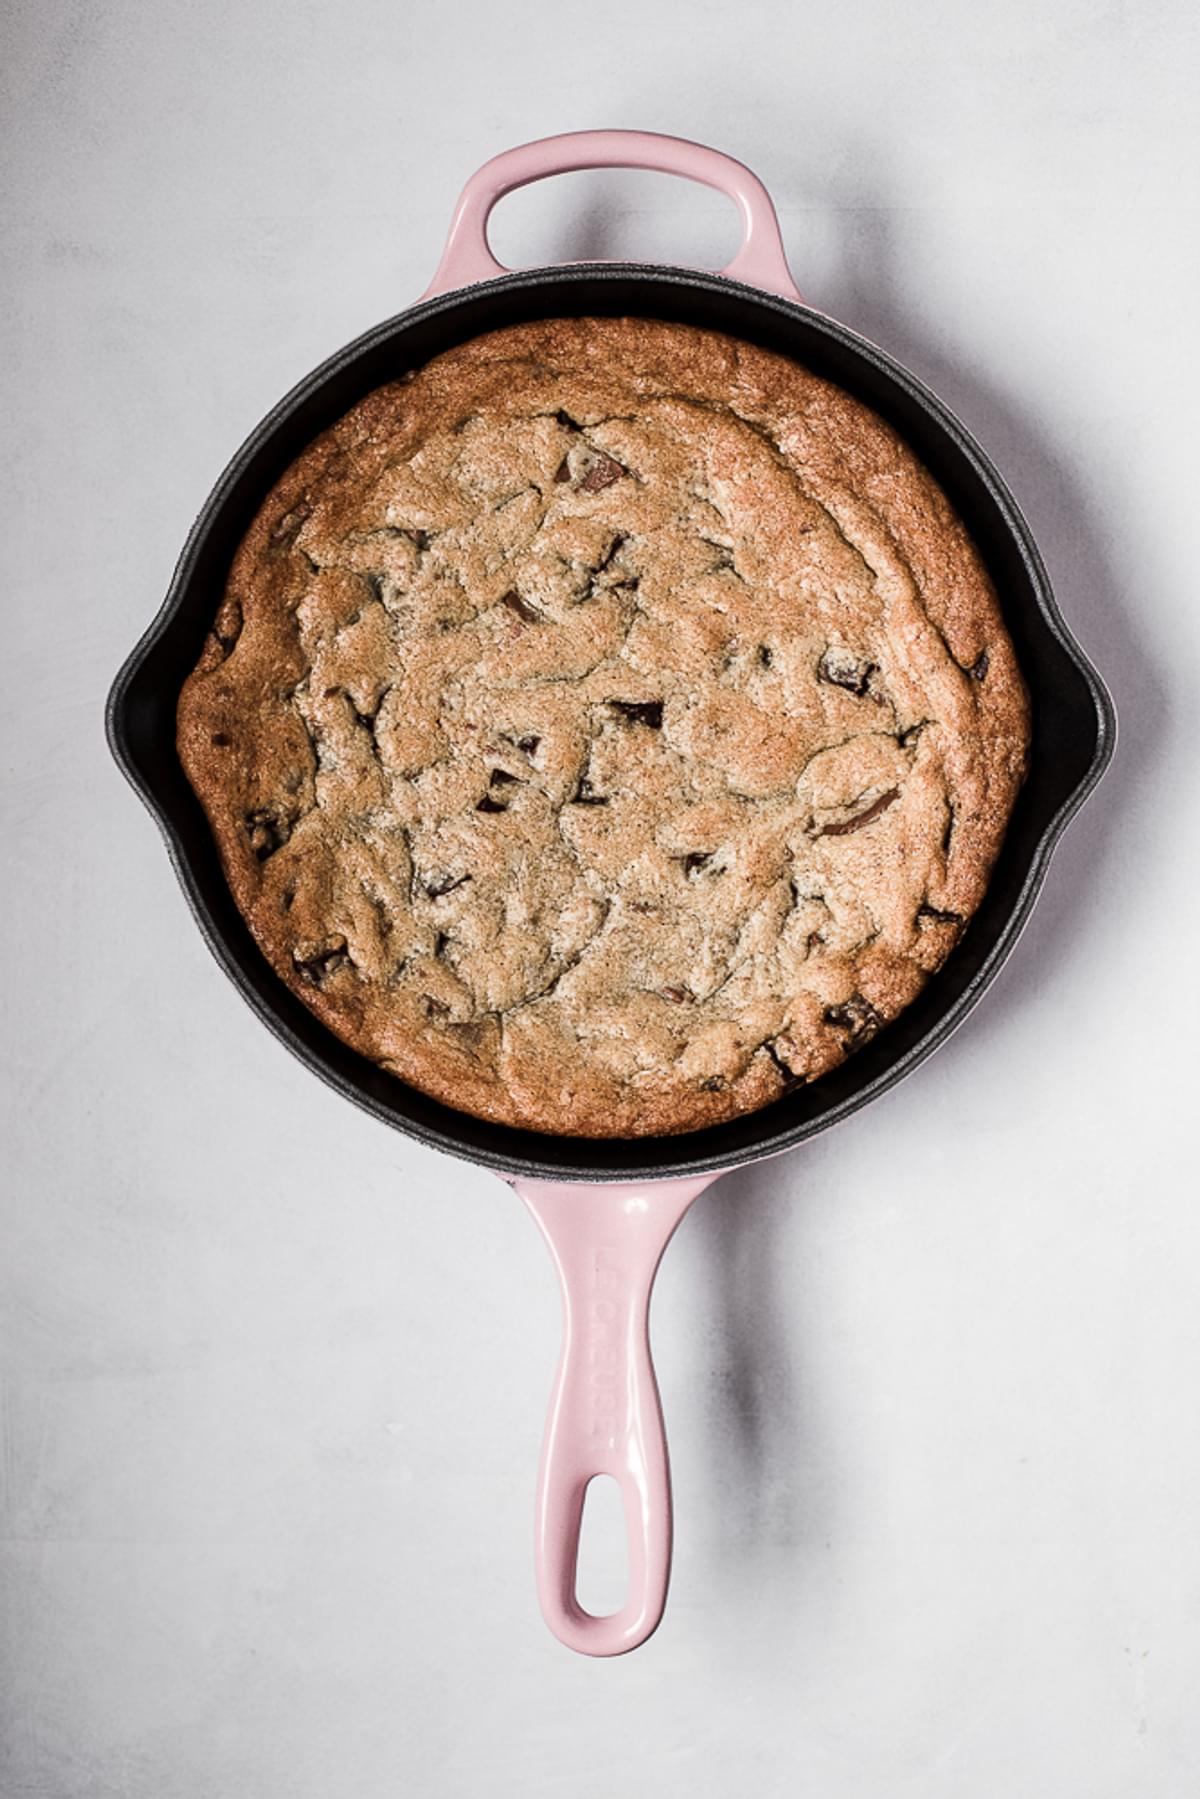 freshly baked chocolate chip skillet cookie in a pink cast iron skillet